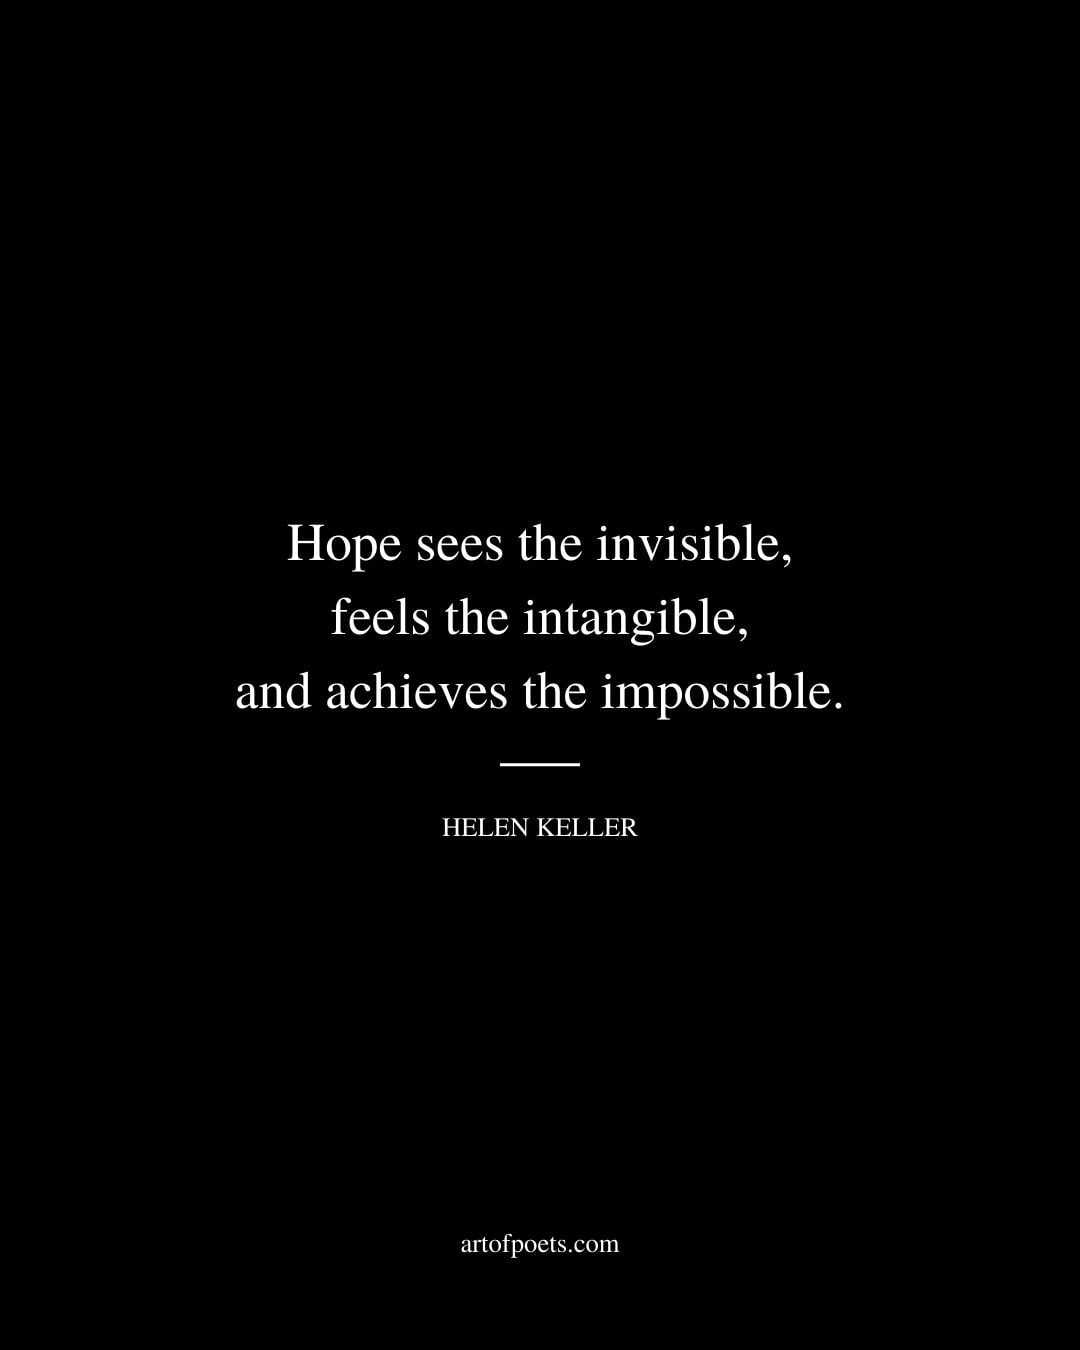 Hope sees the invisible feels the intangible and achieves the impossible. Helen Keller